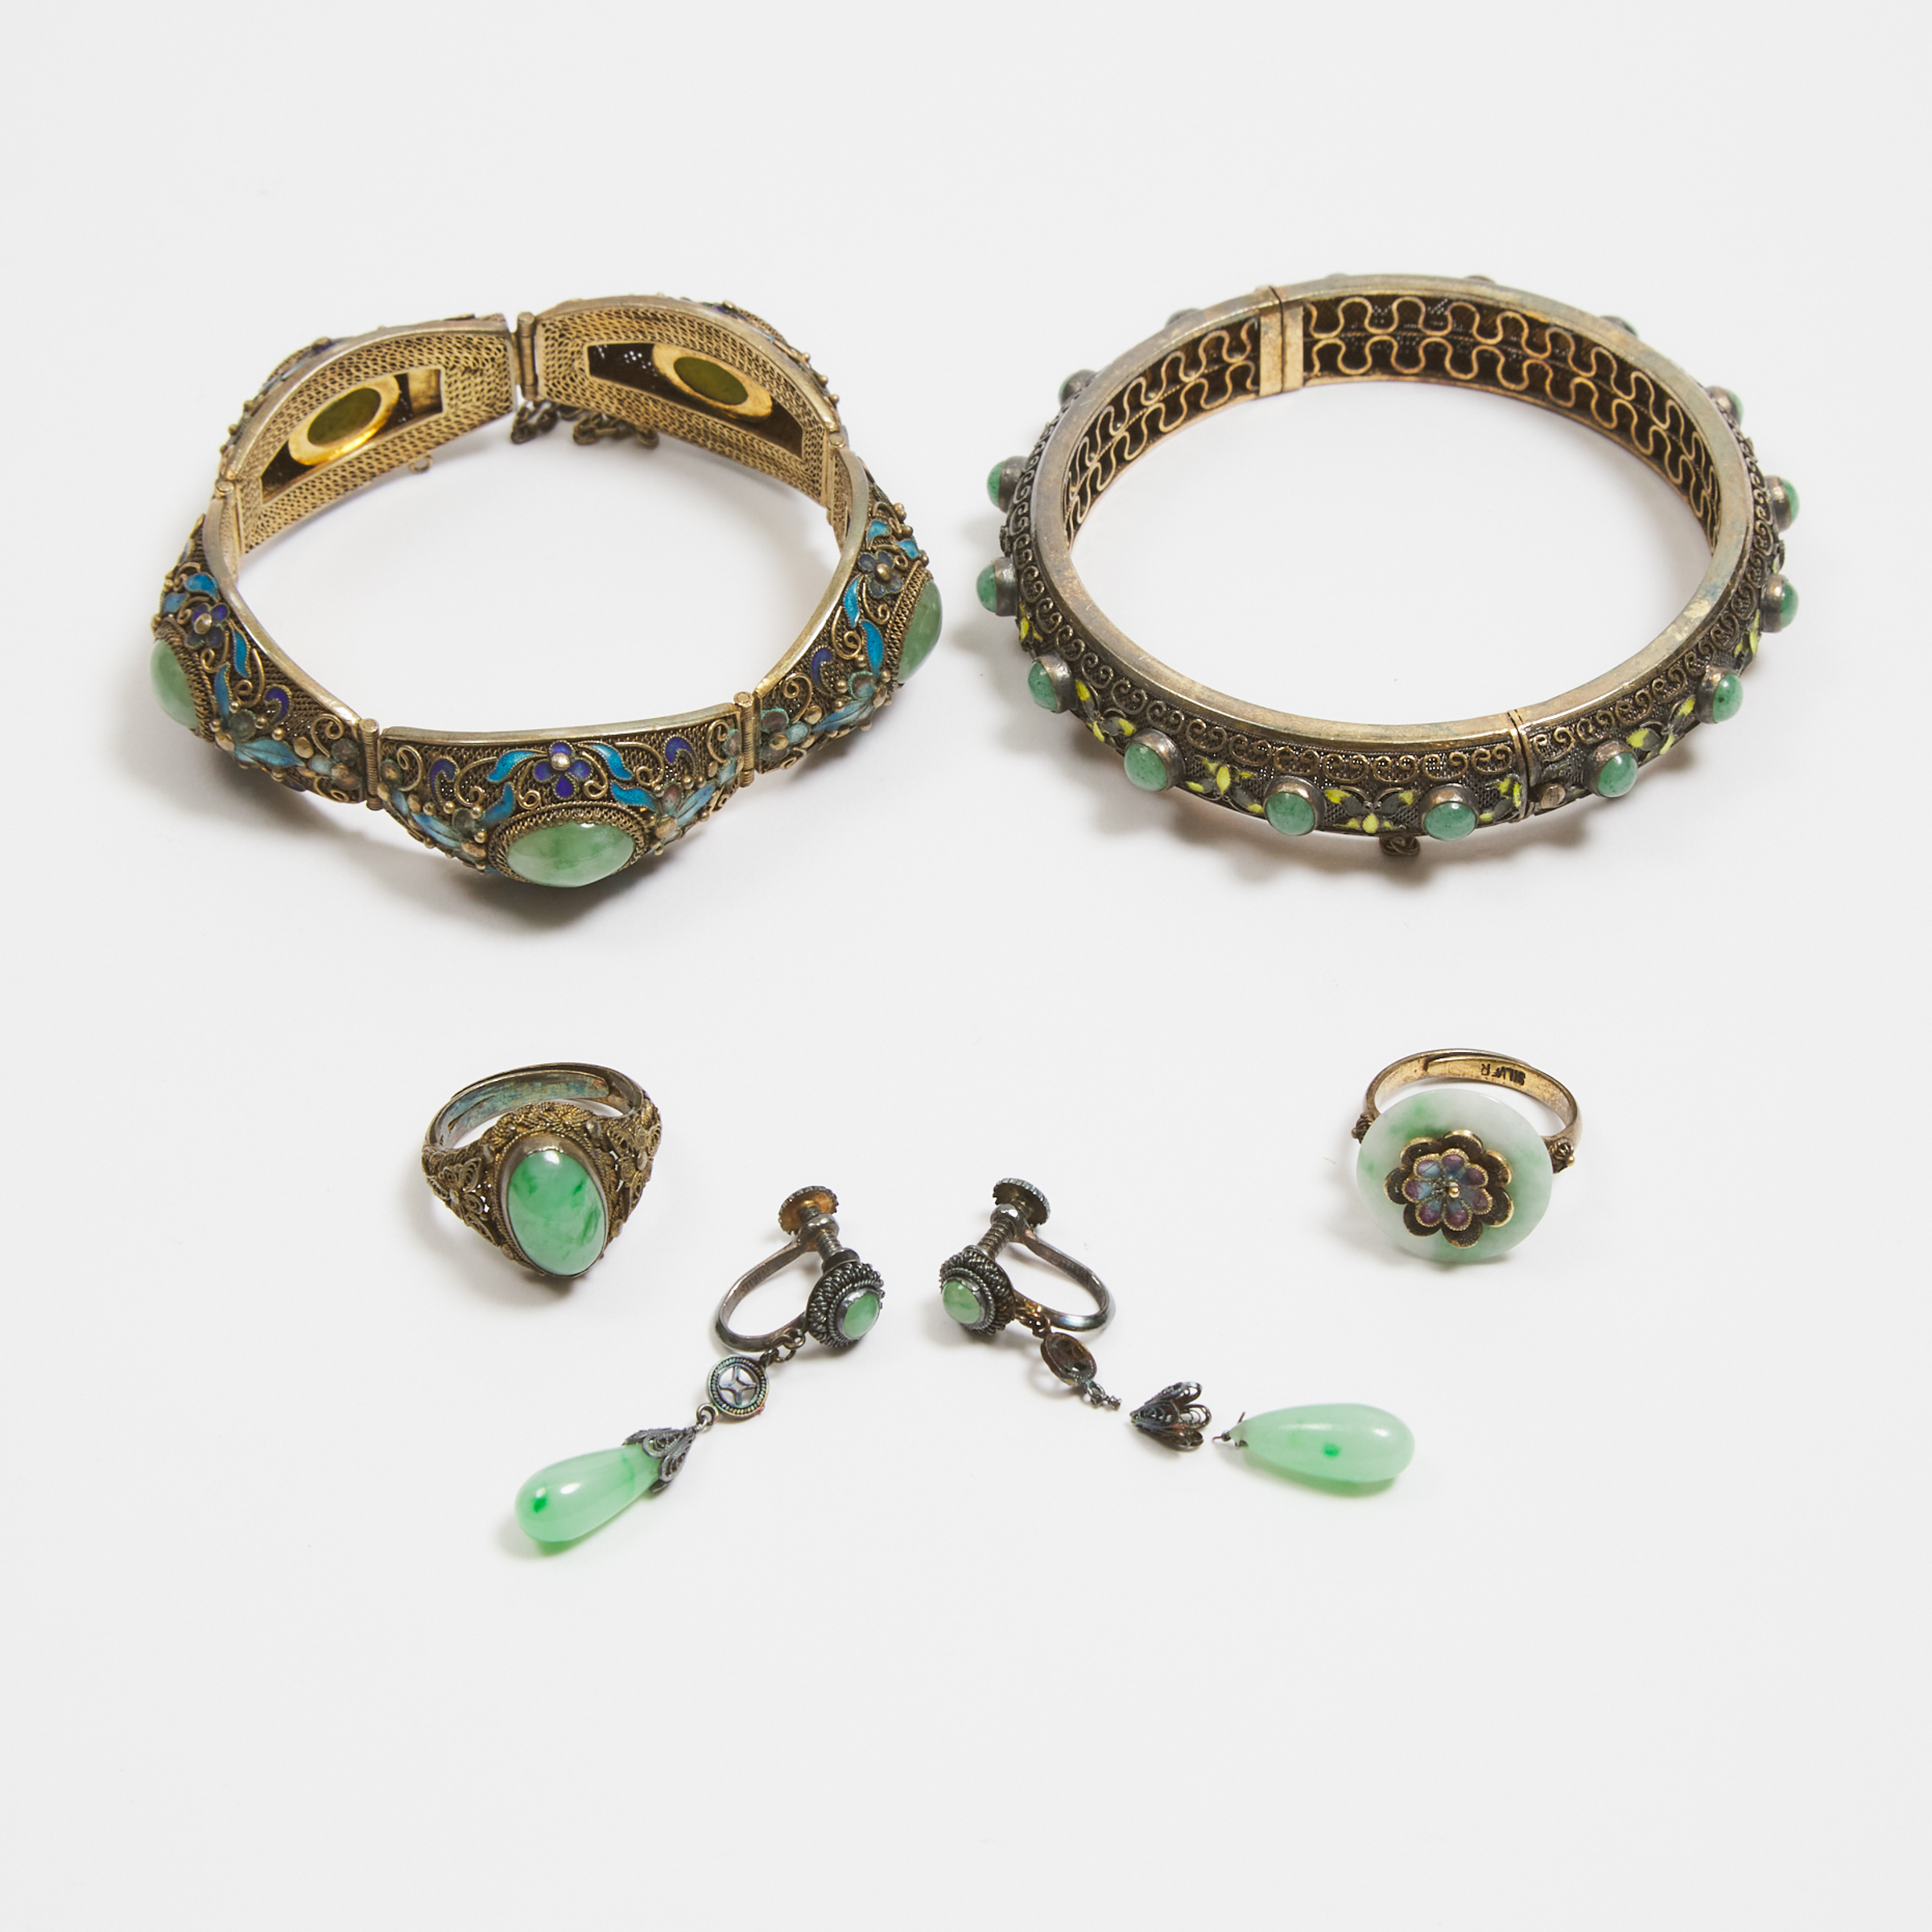 A Group of Six Chinese Gilt and Enameled Silver Filigree Jewellery Pieces with Jadeite Inlays, 19th/20th Century